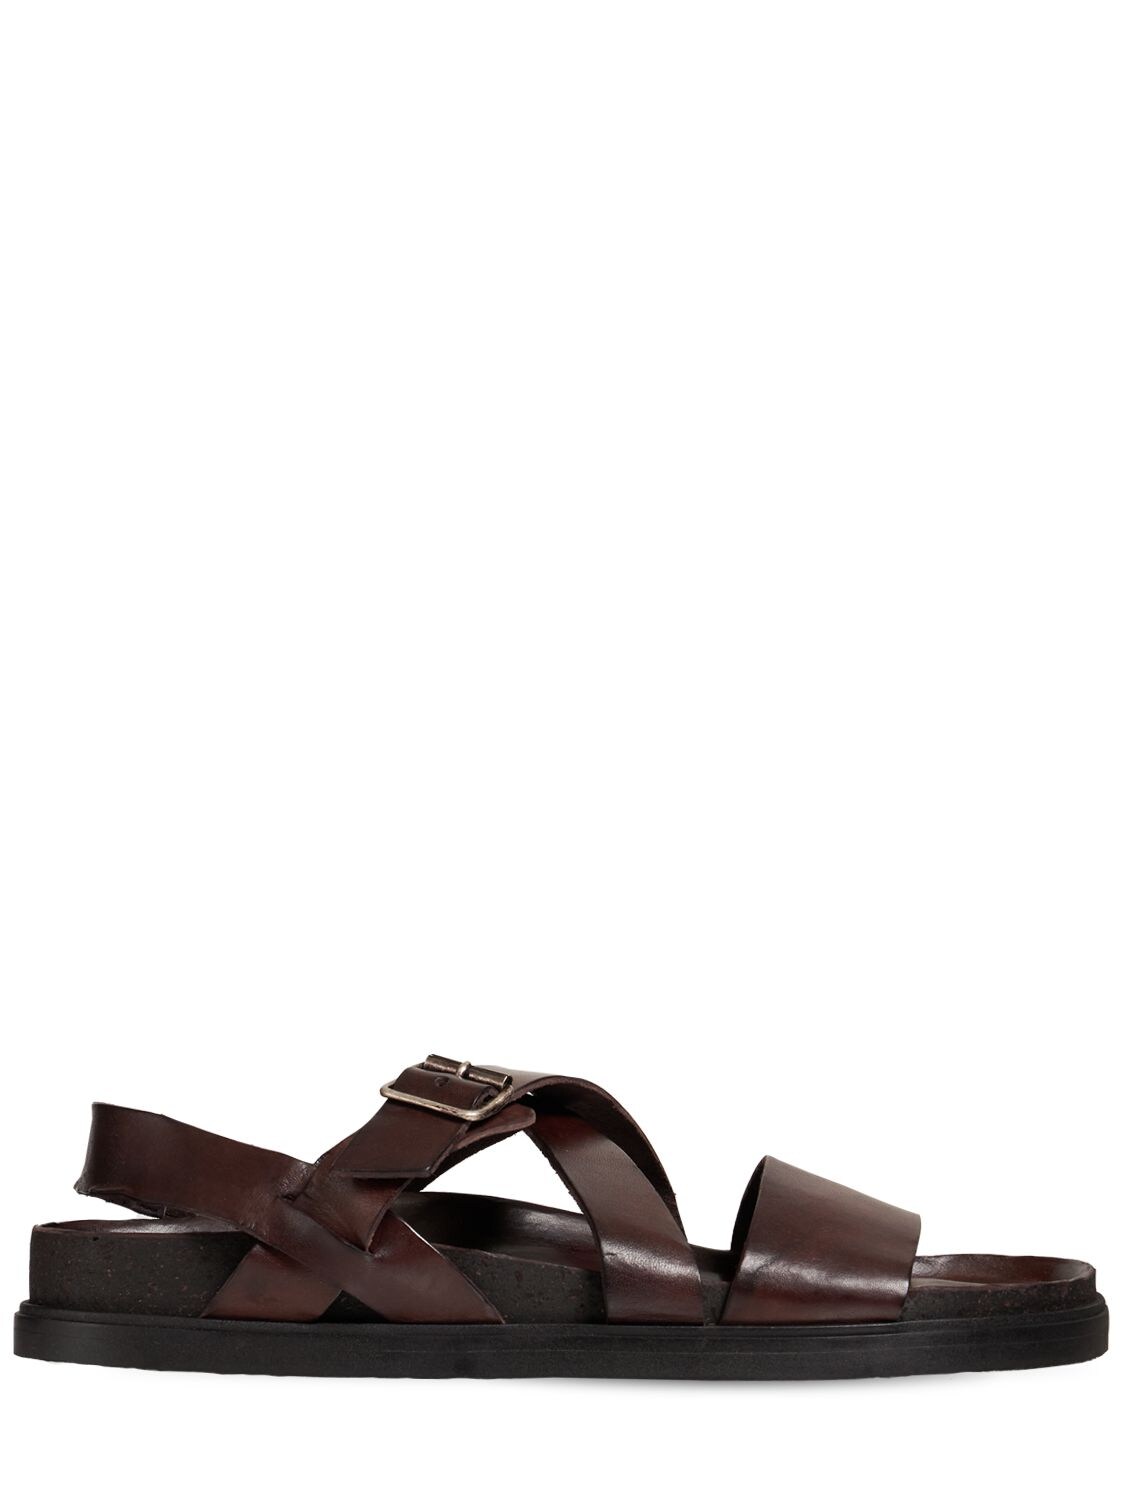 Brador Leather Sandals W/ Buckle In Brown | ModeSens